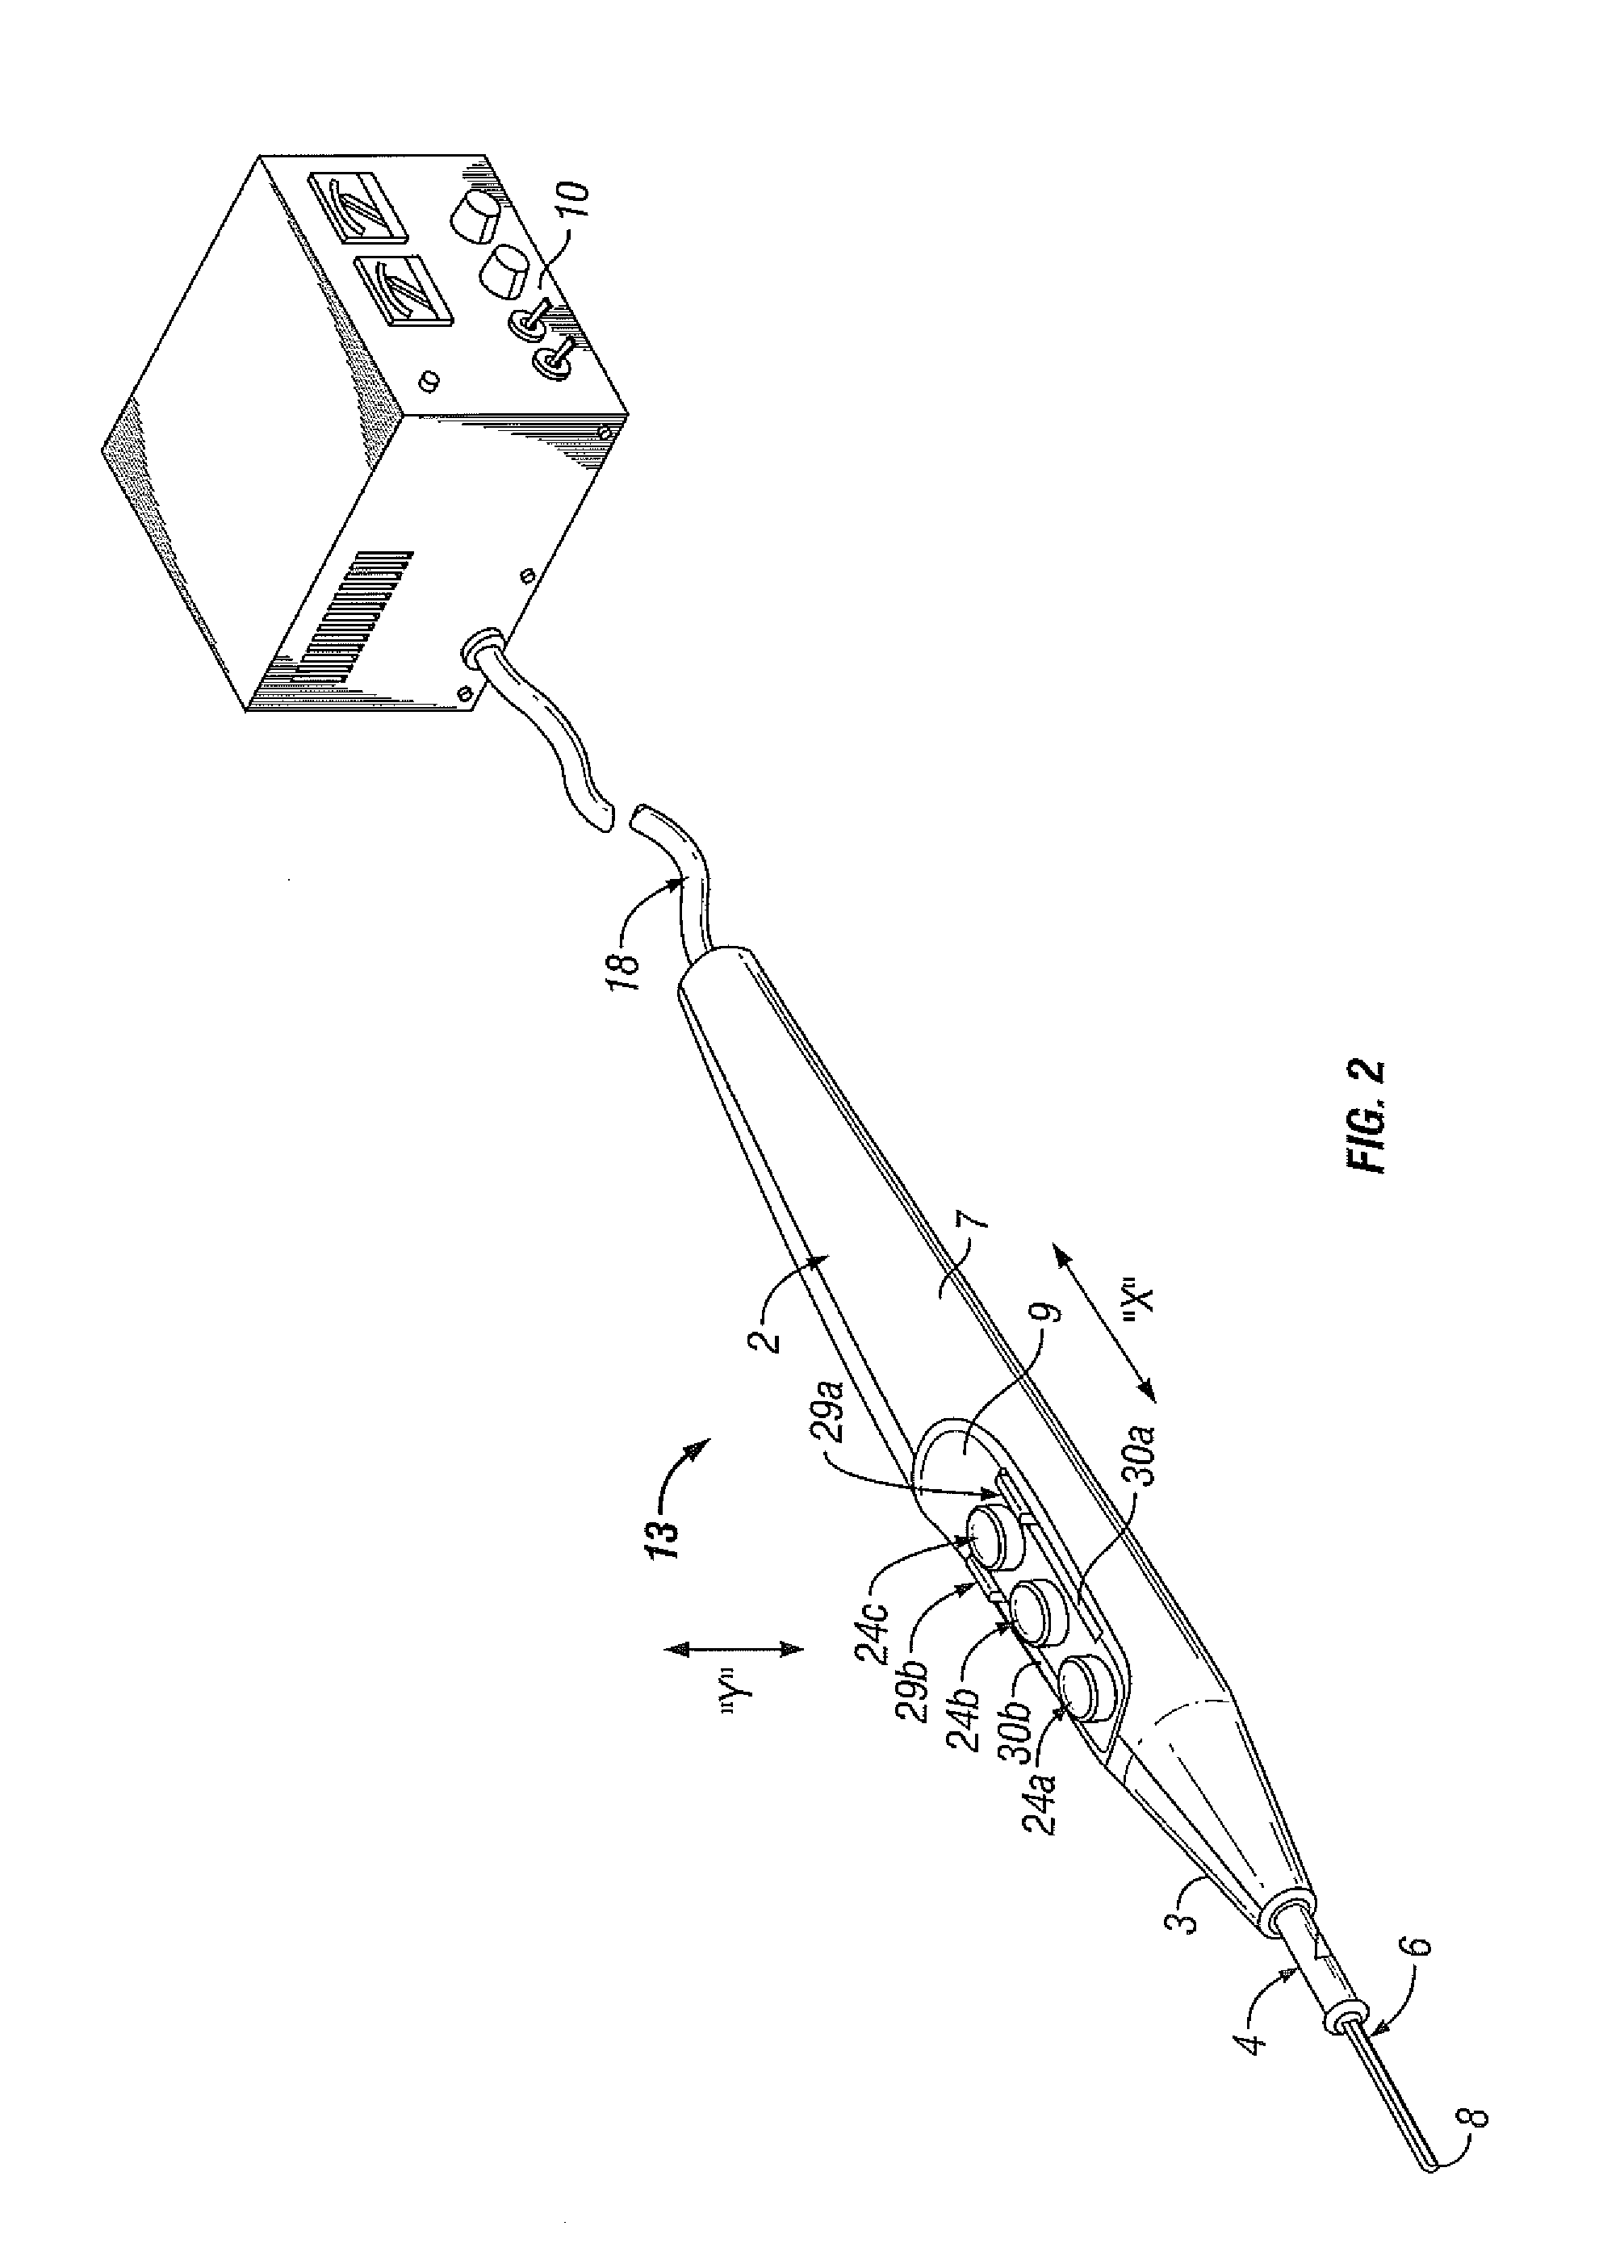 Handheld Electrosurgical Apparatus for Controlling Operating Room Equipment